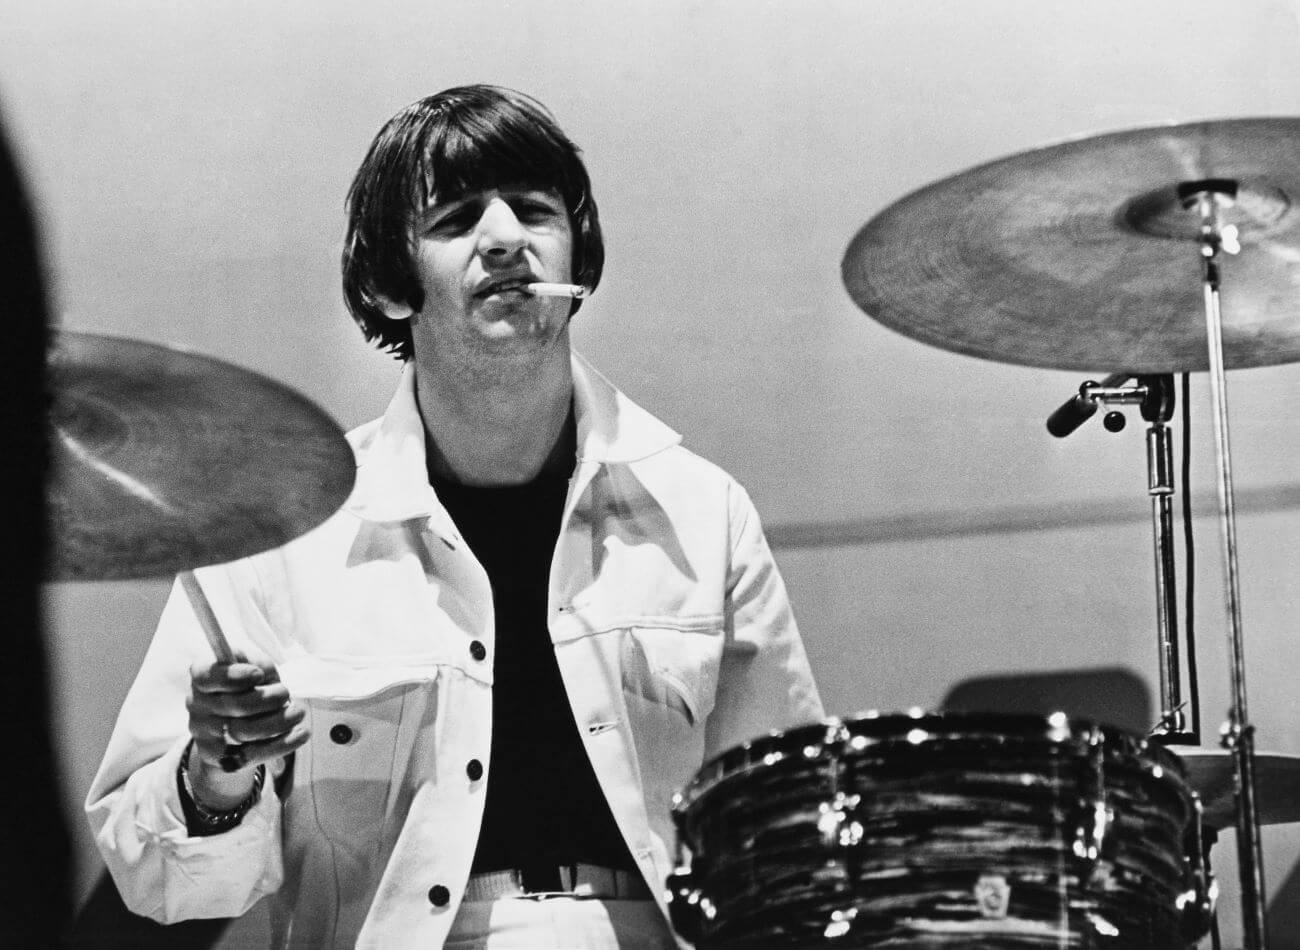 A black and white picture of Ringo Starr drumming while holding a cigarette in his mouth.